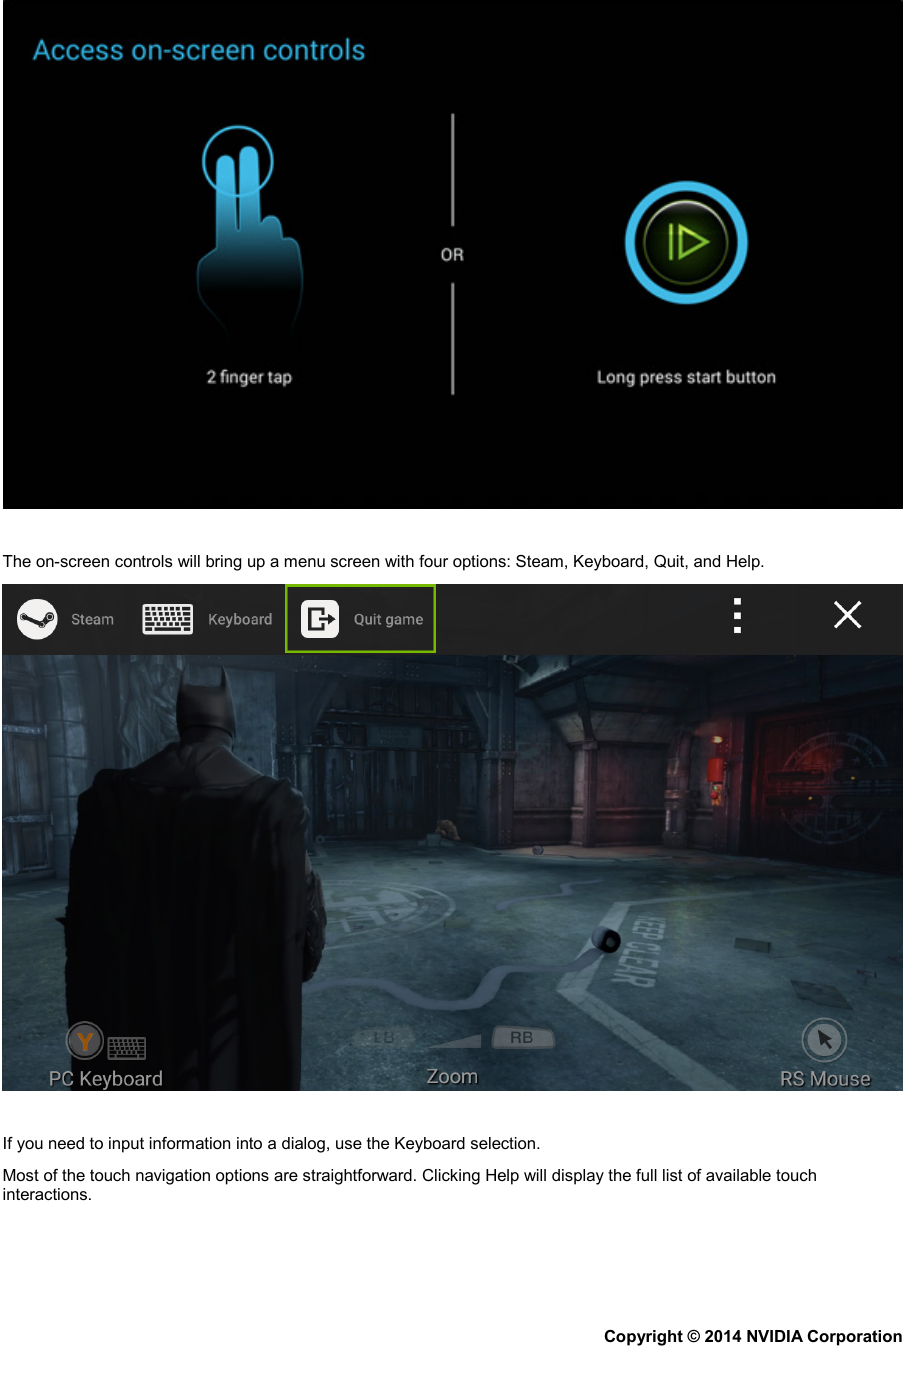    The on-screen controls will bring up a menu screen with four options: Steam, Keyboard, Quit, and Help.    If you need to input information into a dialog, use the Keyboard selection. Most of the touch navigation options are straightforward. Clicking Help will display the full list of available touch interactions.   Copyright © 2014 NVIDIA Corporation   